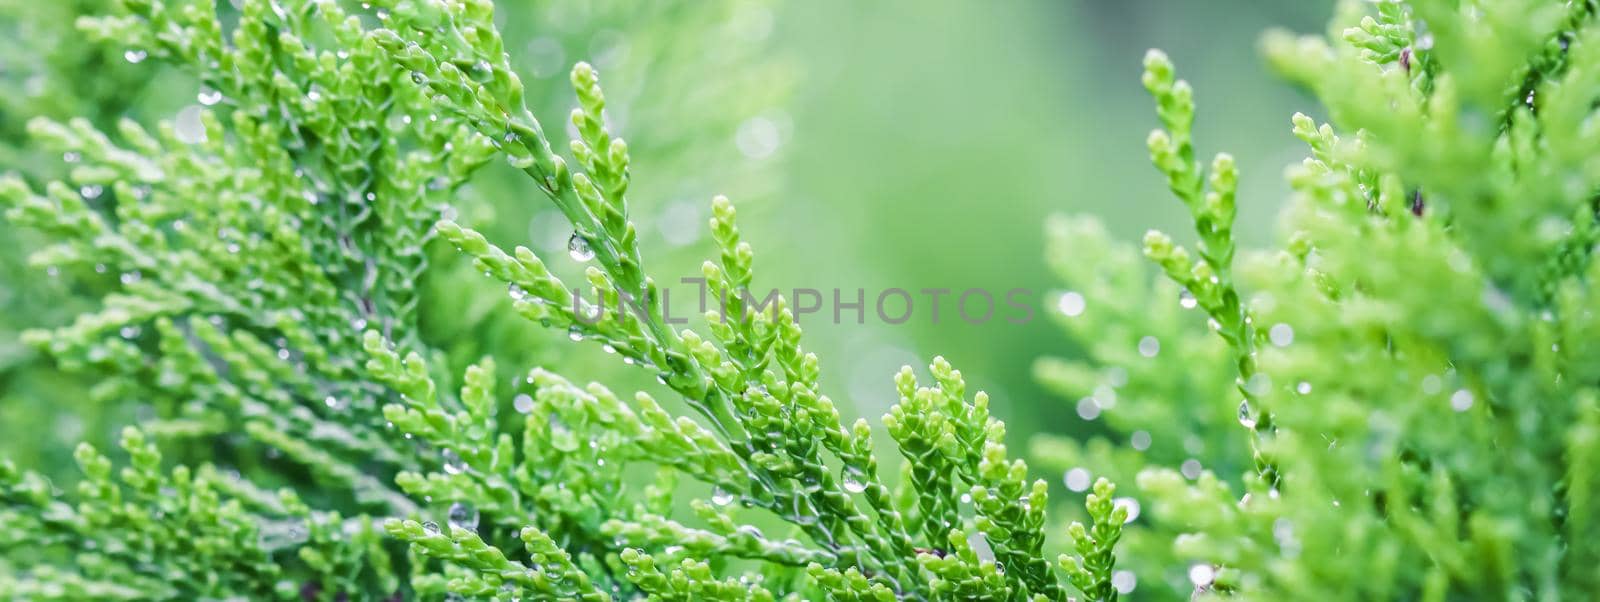 Closeup green leaves of evergreen coniferous tree Lawson Cypress or Chamaecyparis lawsoniana after the rain. Extreme bokeh with light reflection. Macro photography, selective focus, blurred background. Space for text